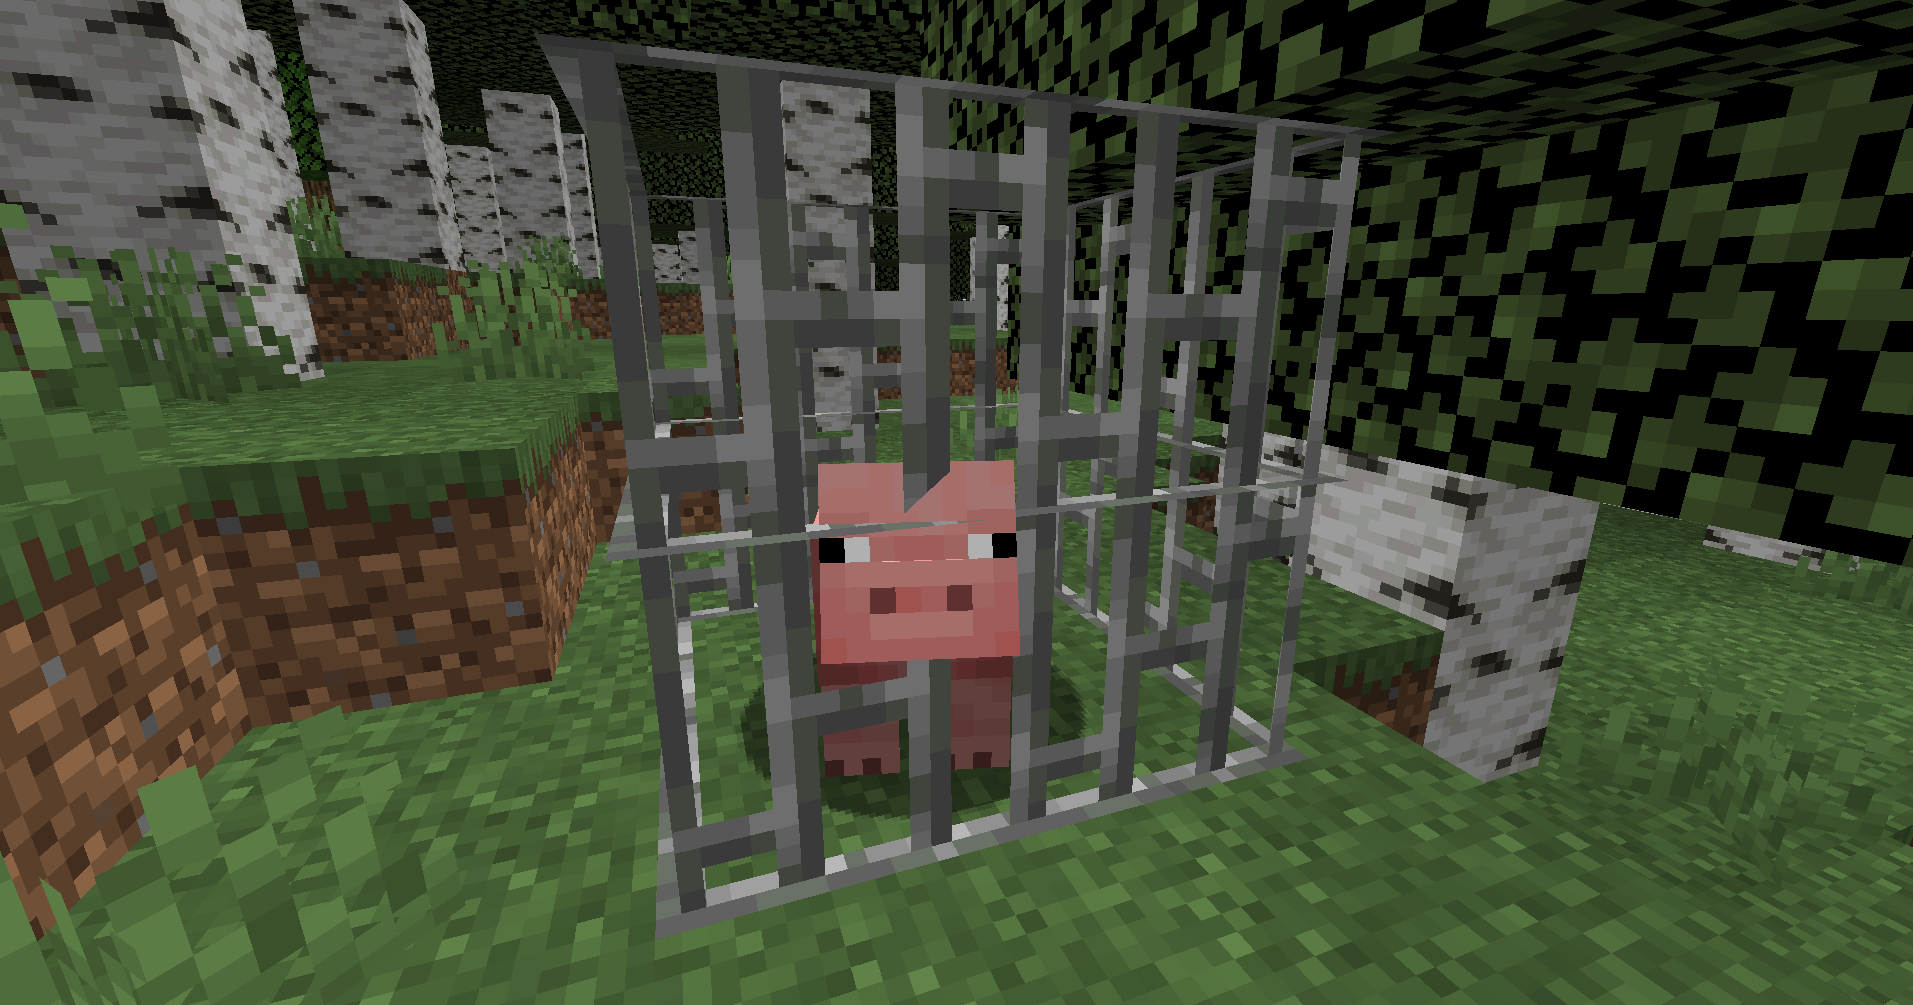 A passive pig trapped in the Cage Trap ready to go back to the farm.